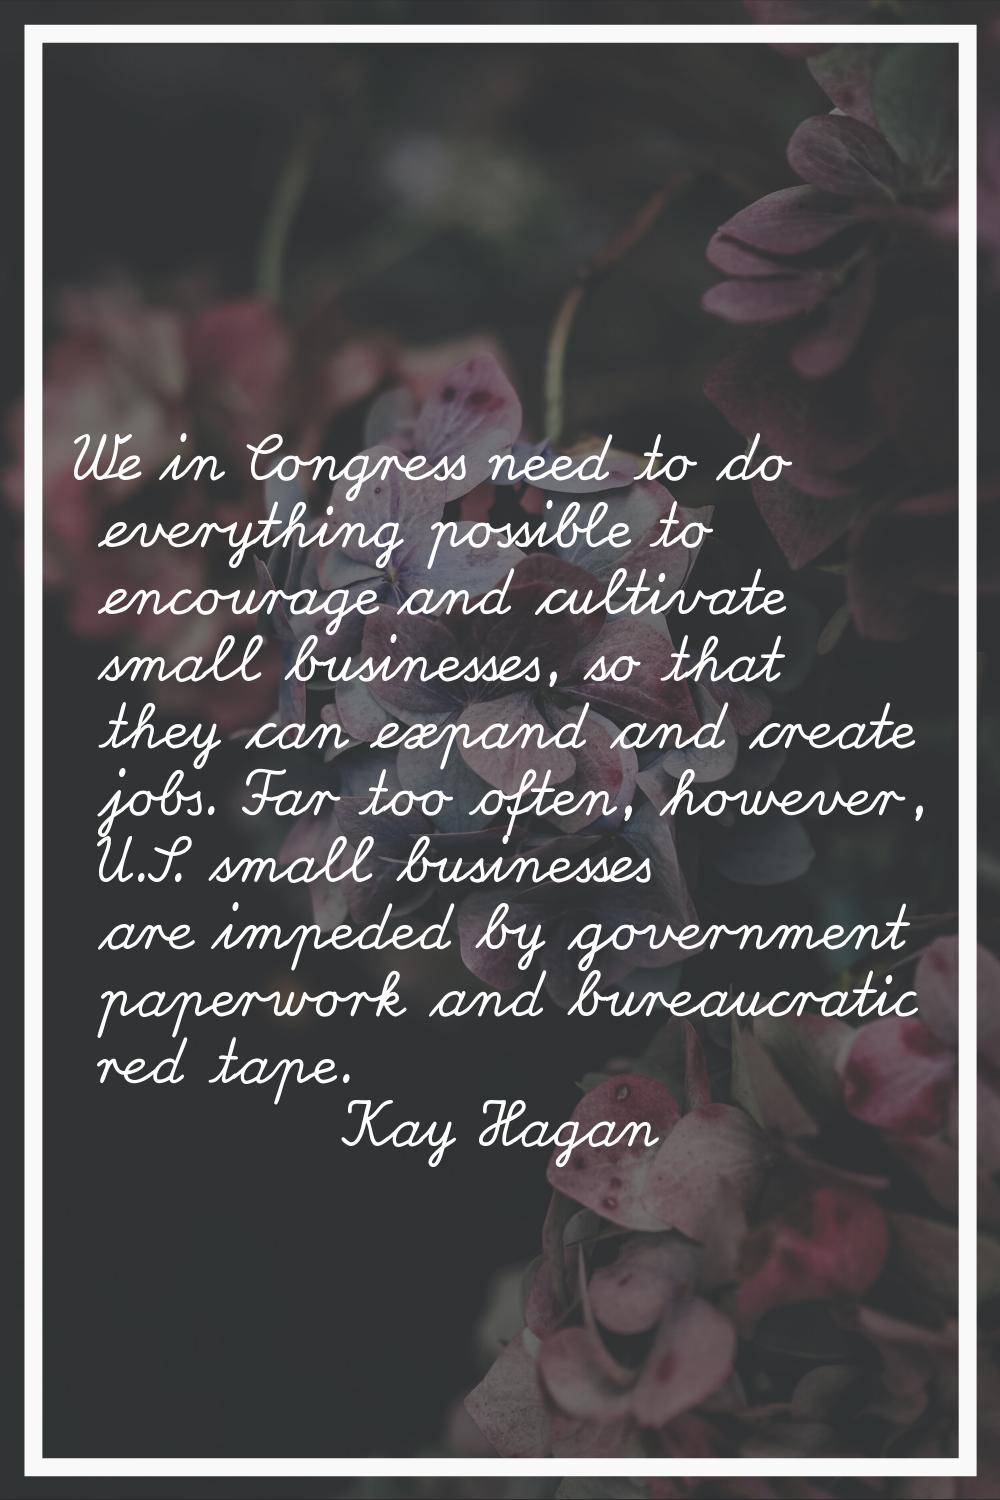 We in Congress need to do everything possible to encourage and cultivate small businesses, so that 